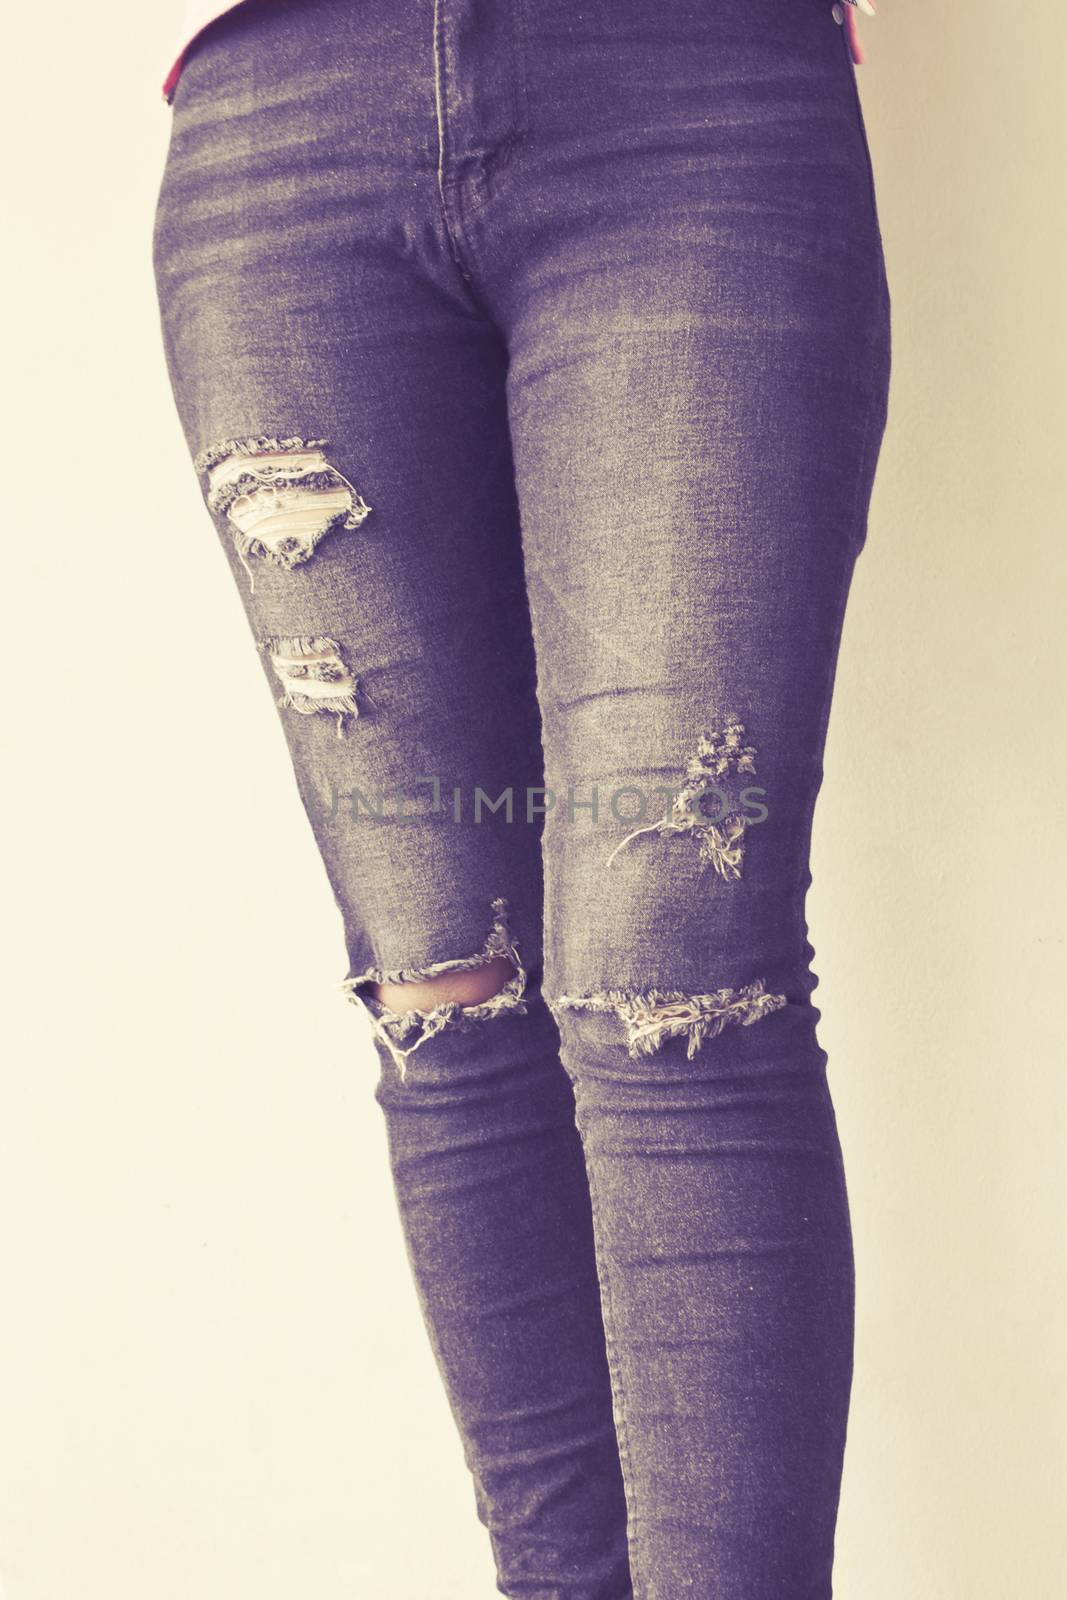 Female wearing jeans vintage tone background by worrayuth